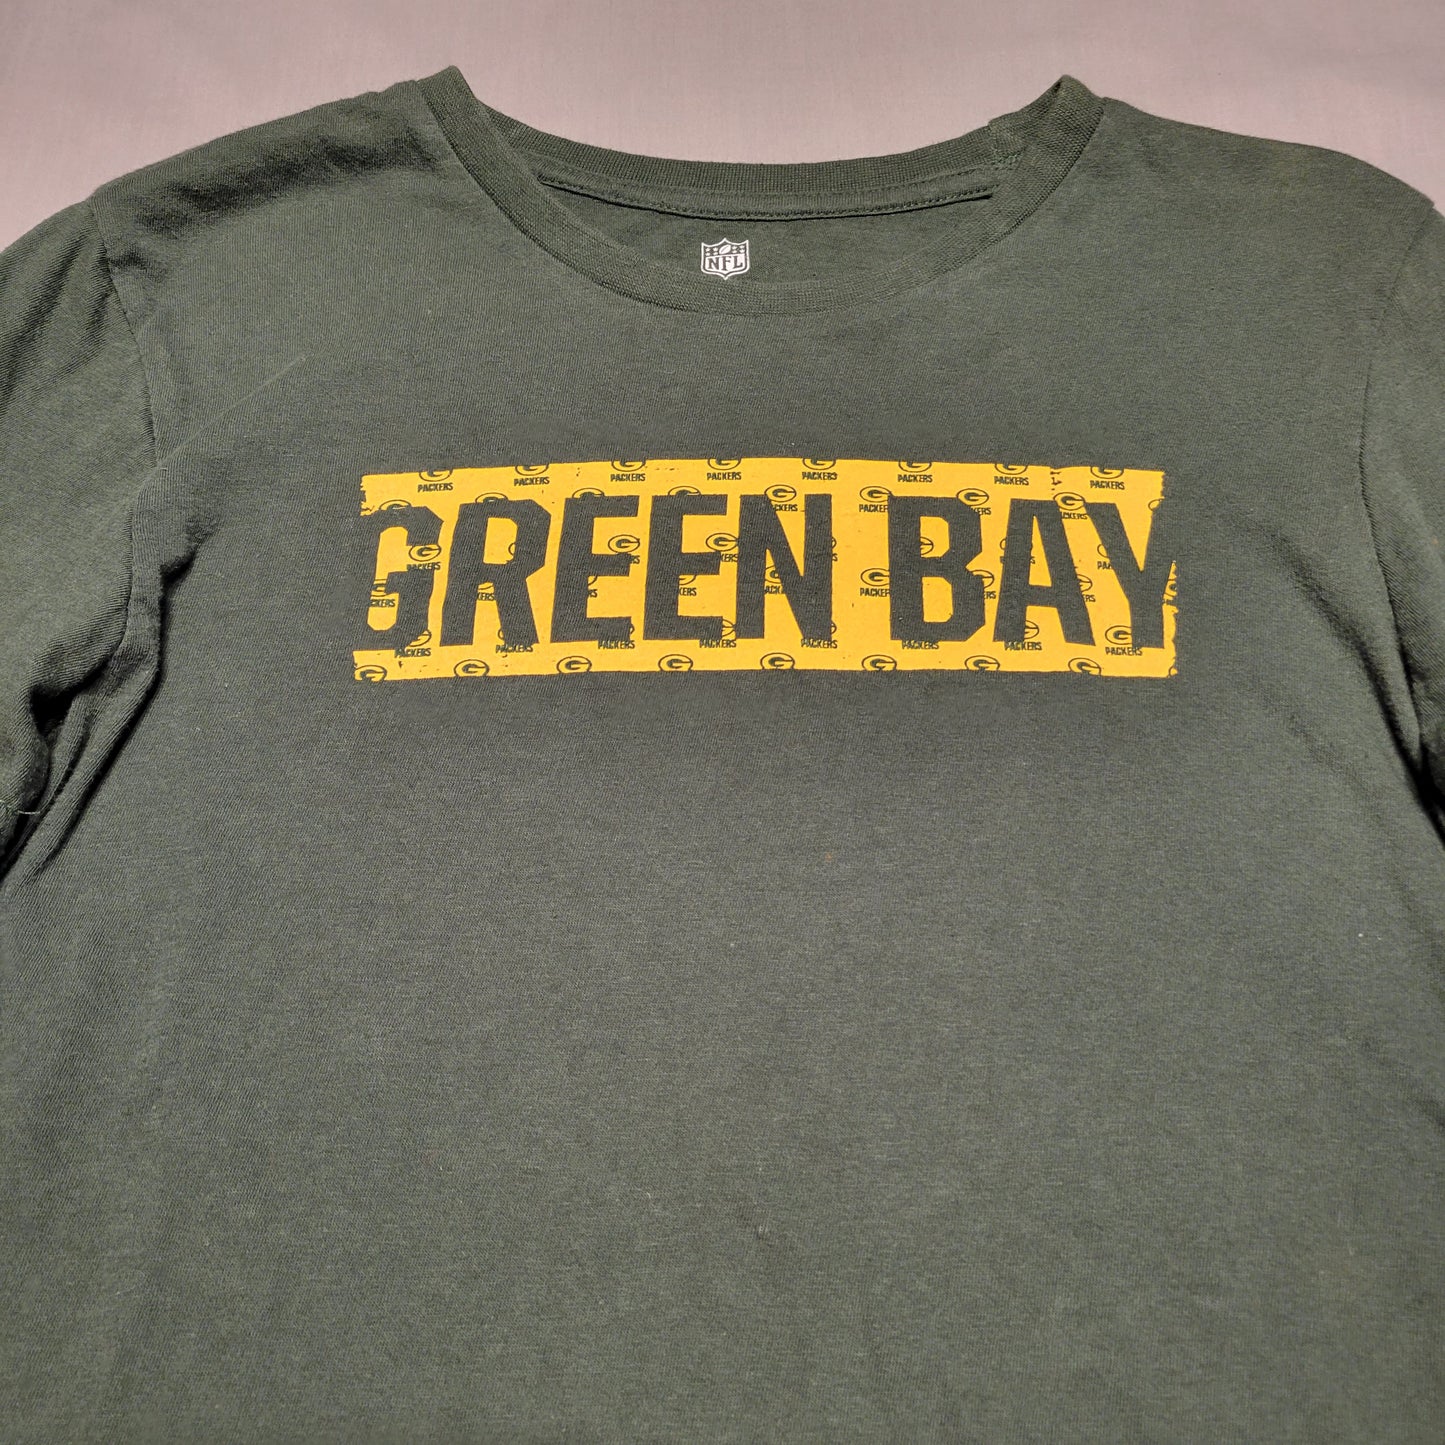 Pre-Owned Junior's Girl Extra Large (XL) Green Bay Packers Baseball Style T-Shirt